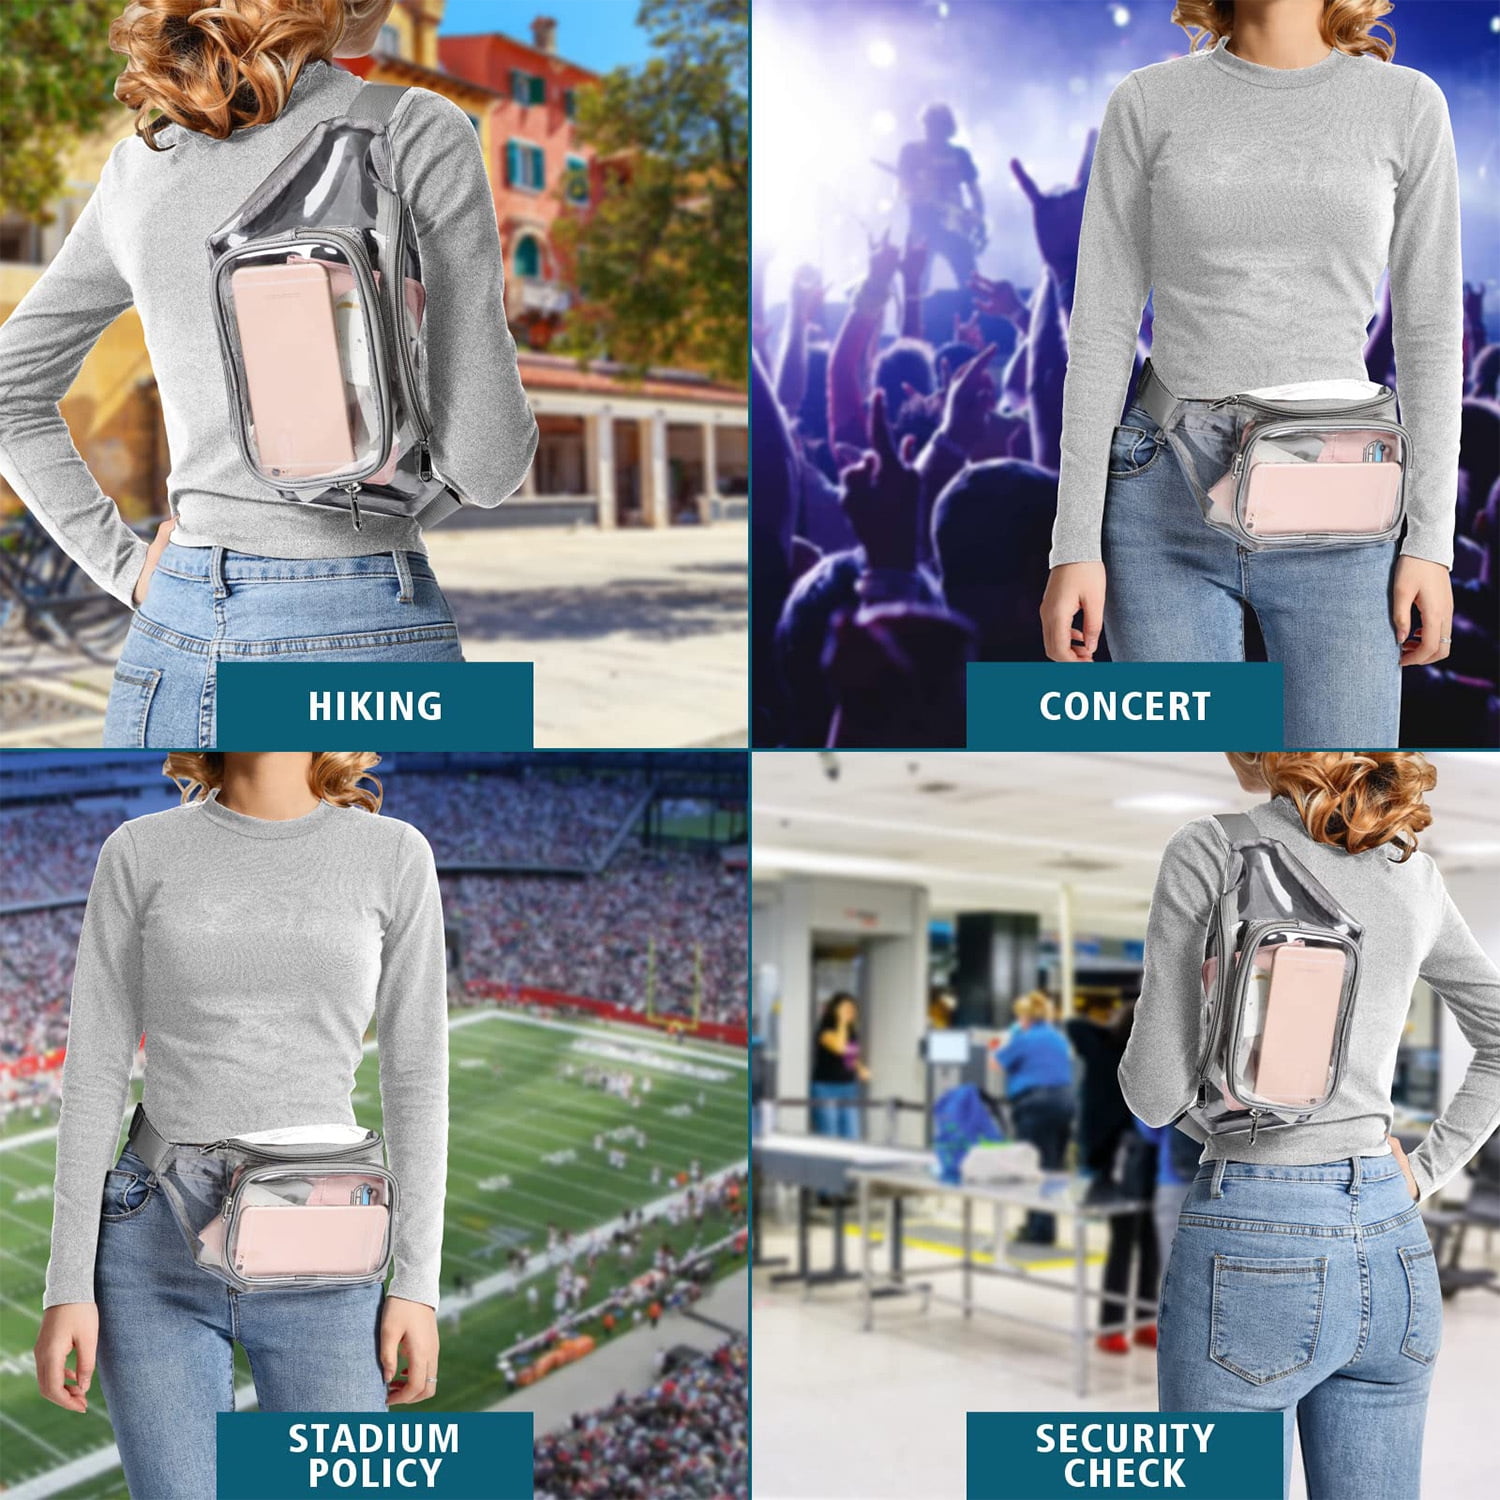  Clear Fanny Pack Stadium Approved - Packism Waterproof Cute Waist  Bag for Women Men Clear Purse Transparent Adjustable Belt Bag for Concerts,  Festival, Travel, Events, White